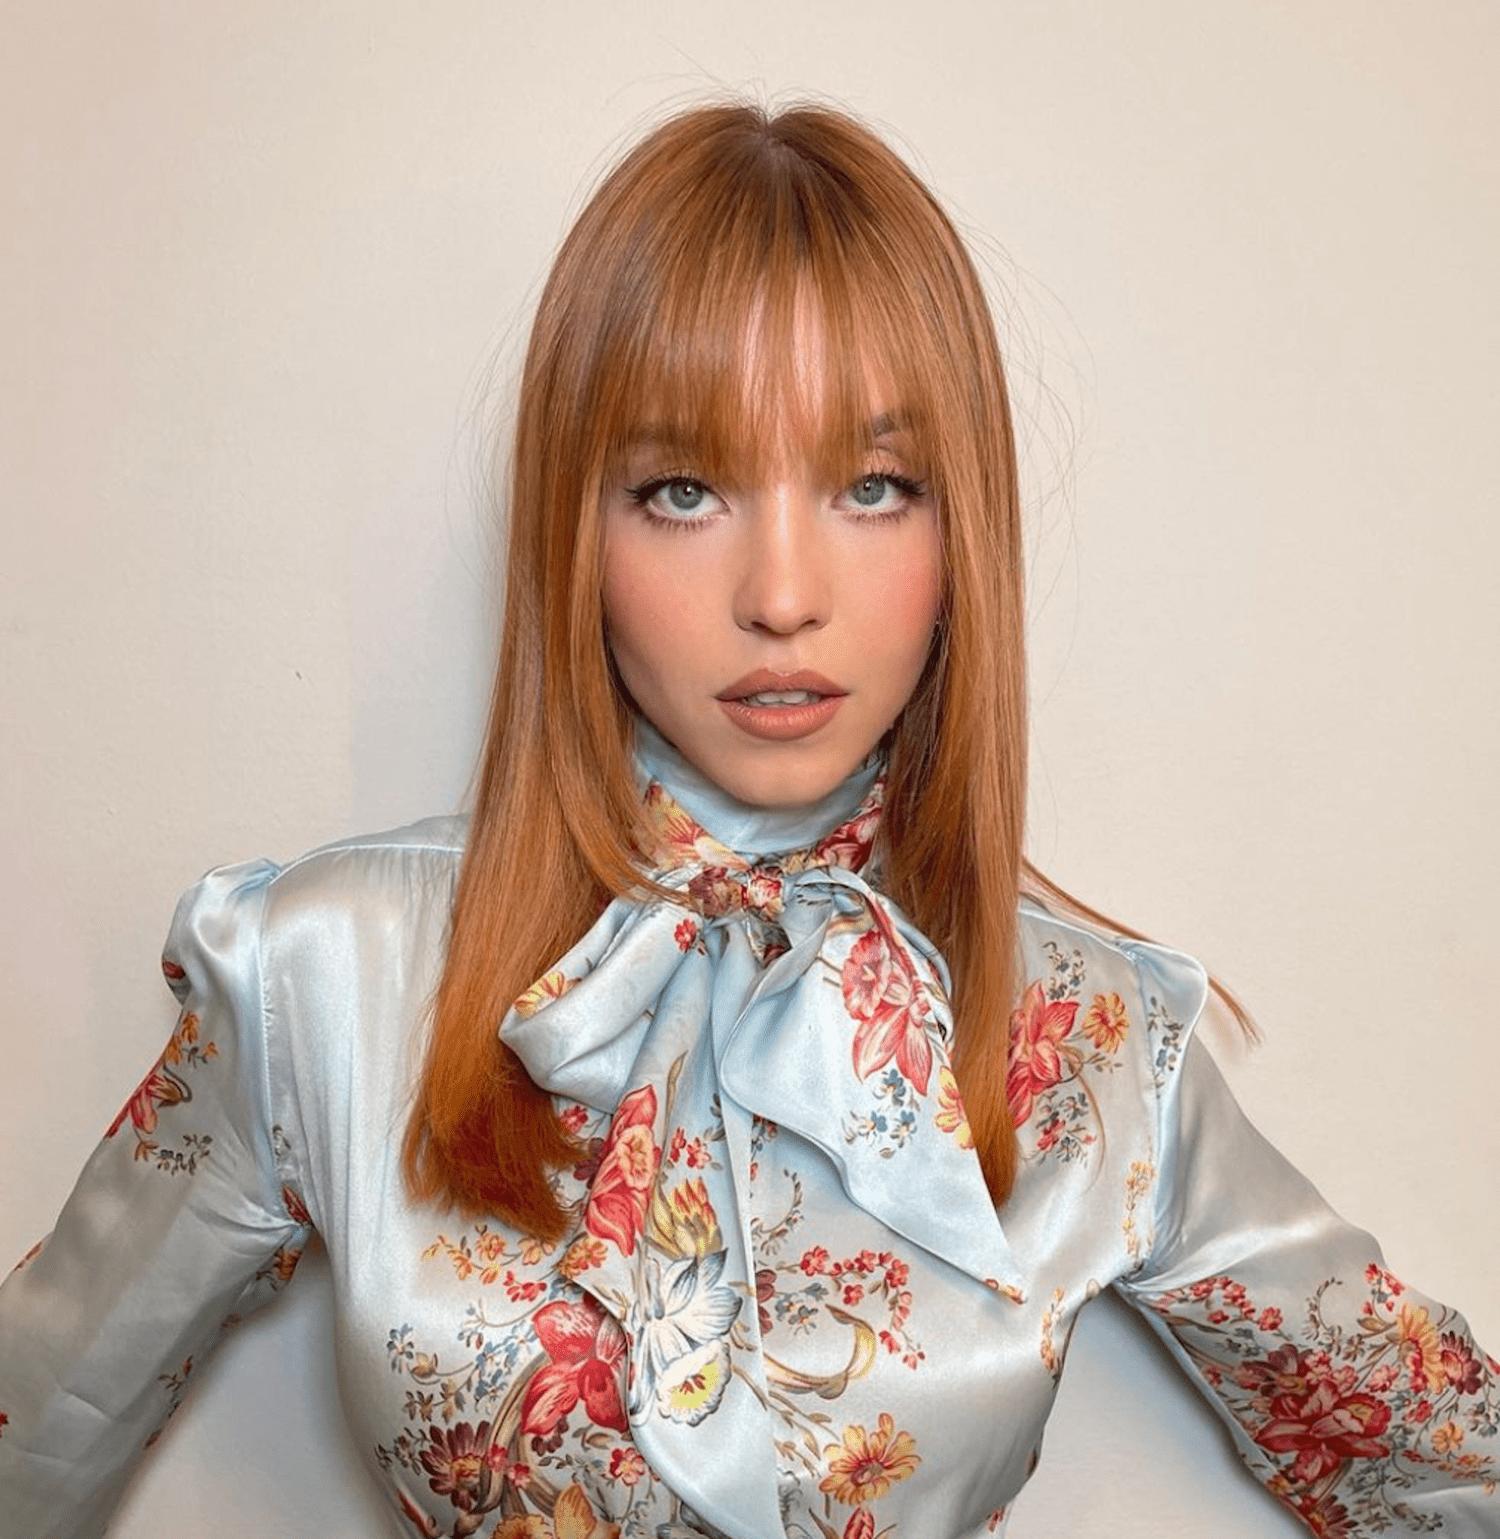 SYDNEY SWEENEY POSES FOR THE CAMERA BEFORE APPEARING ON THE ELLEN SHOW